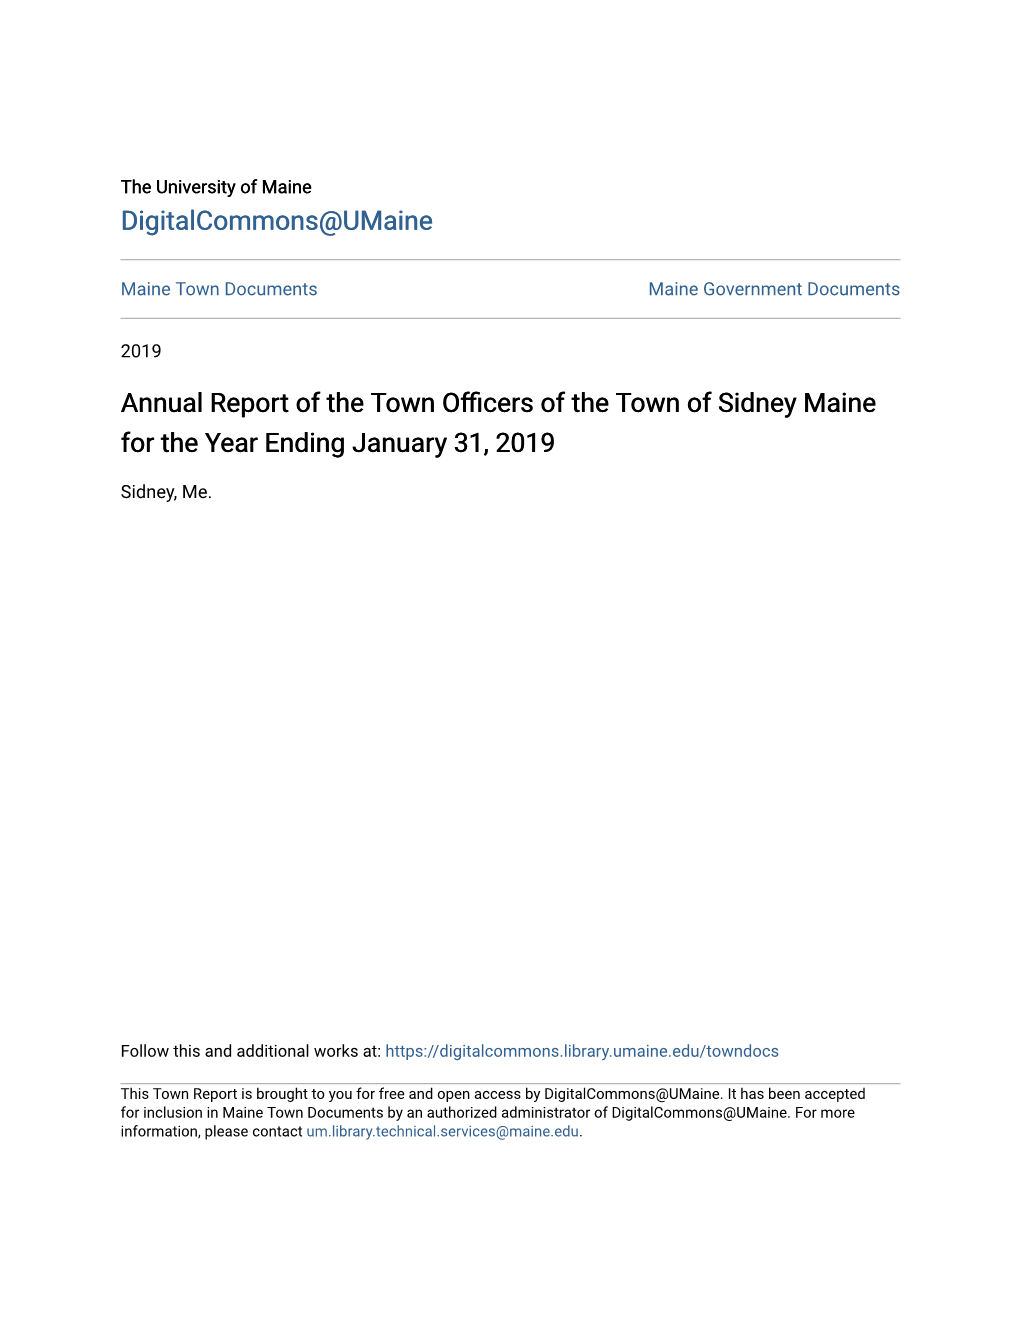 Annual Report of the Town Officers of the Town of Sidney Maine for The